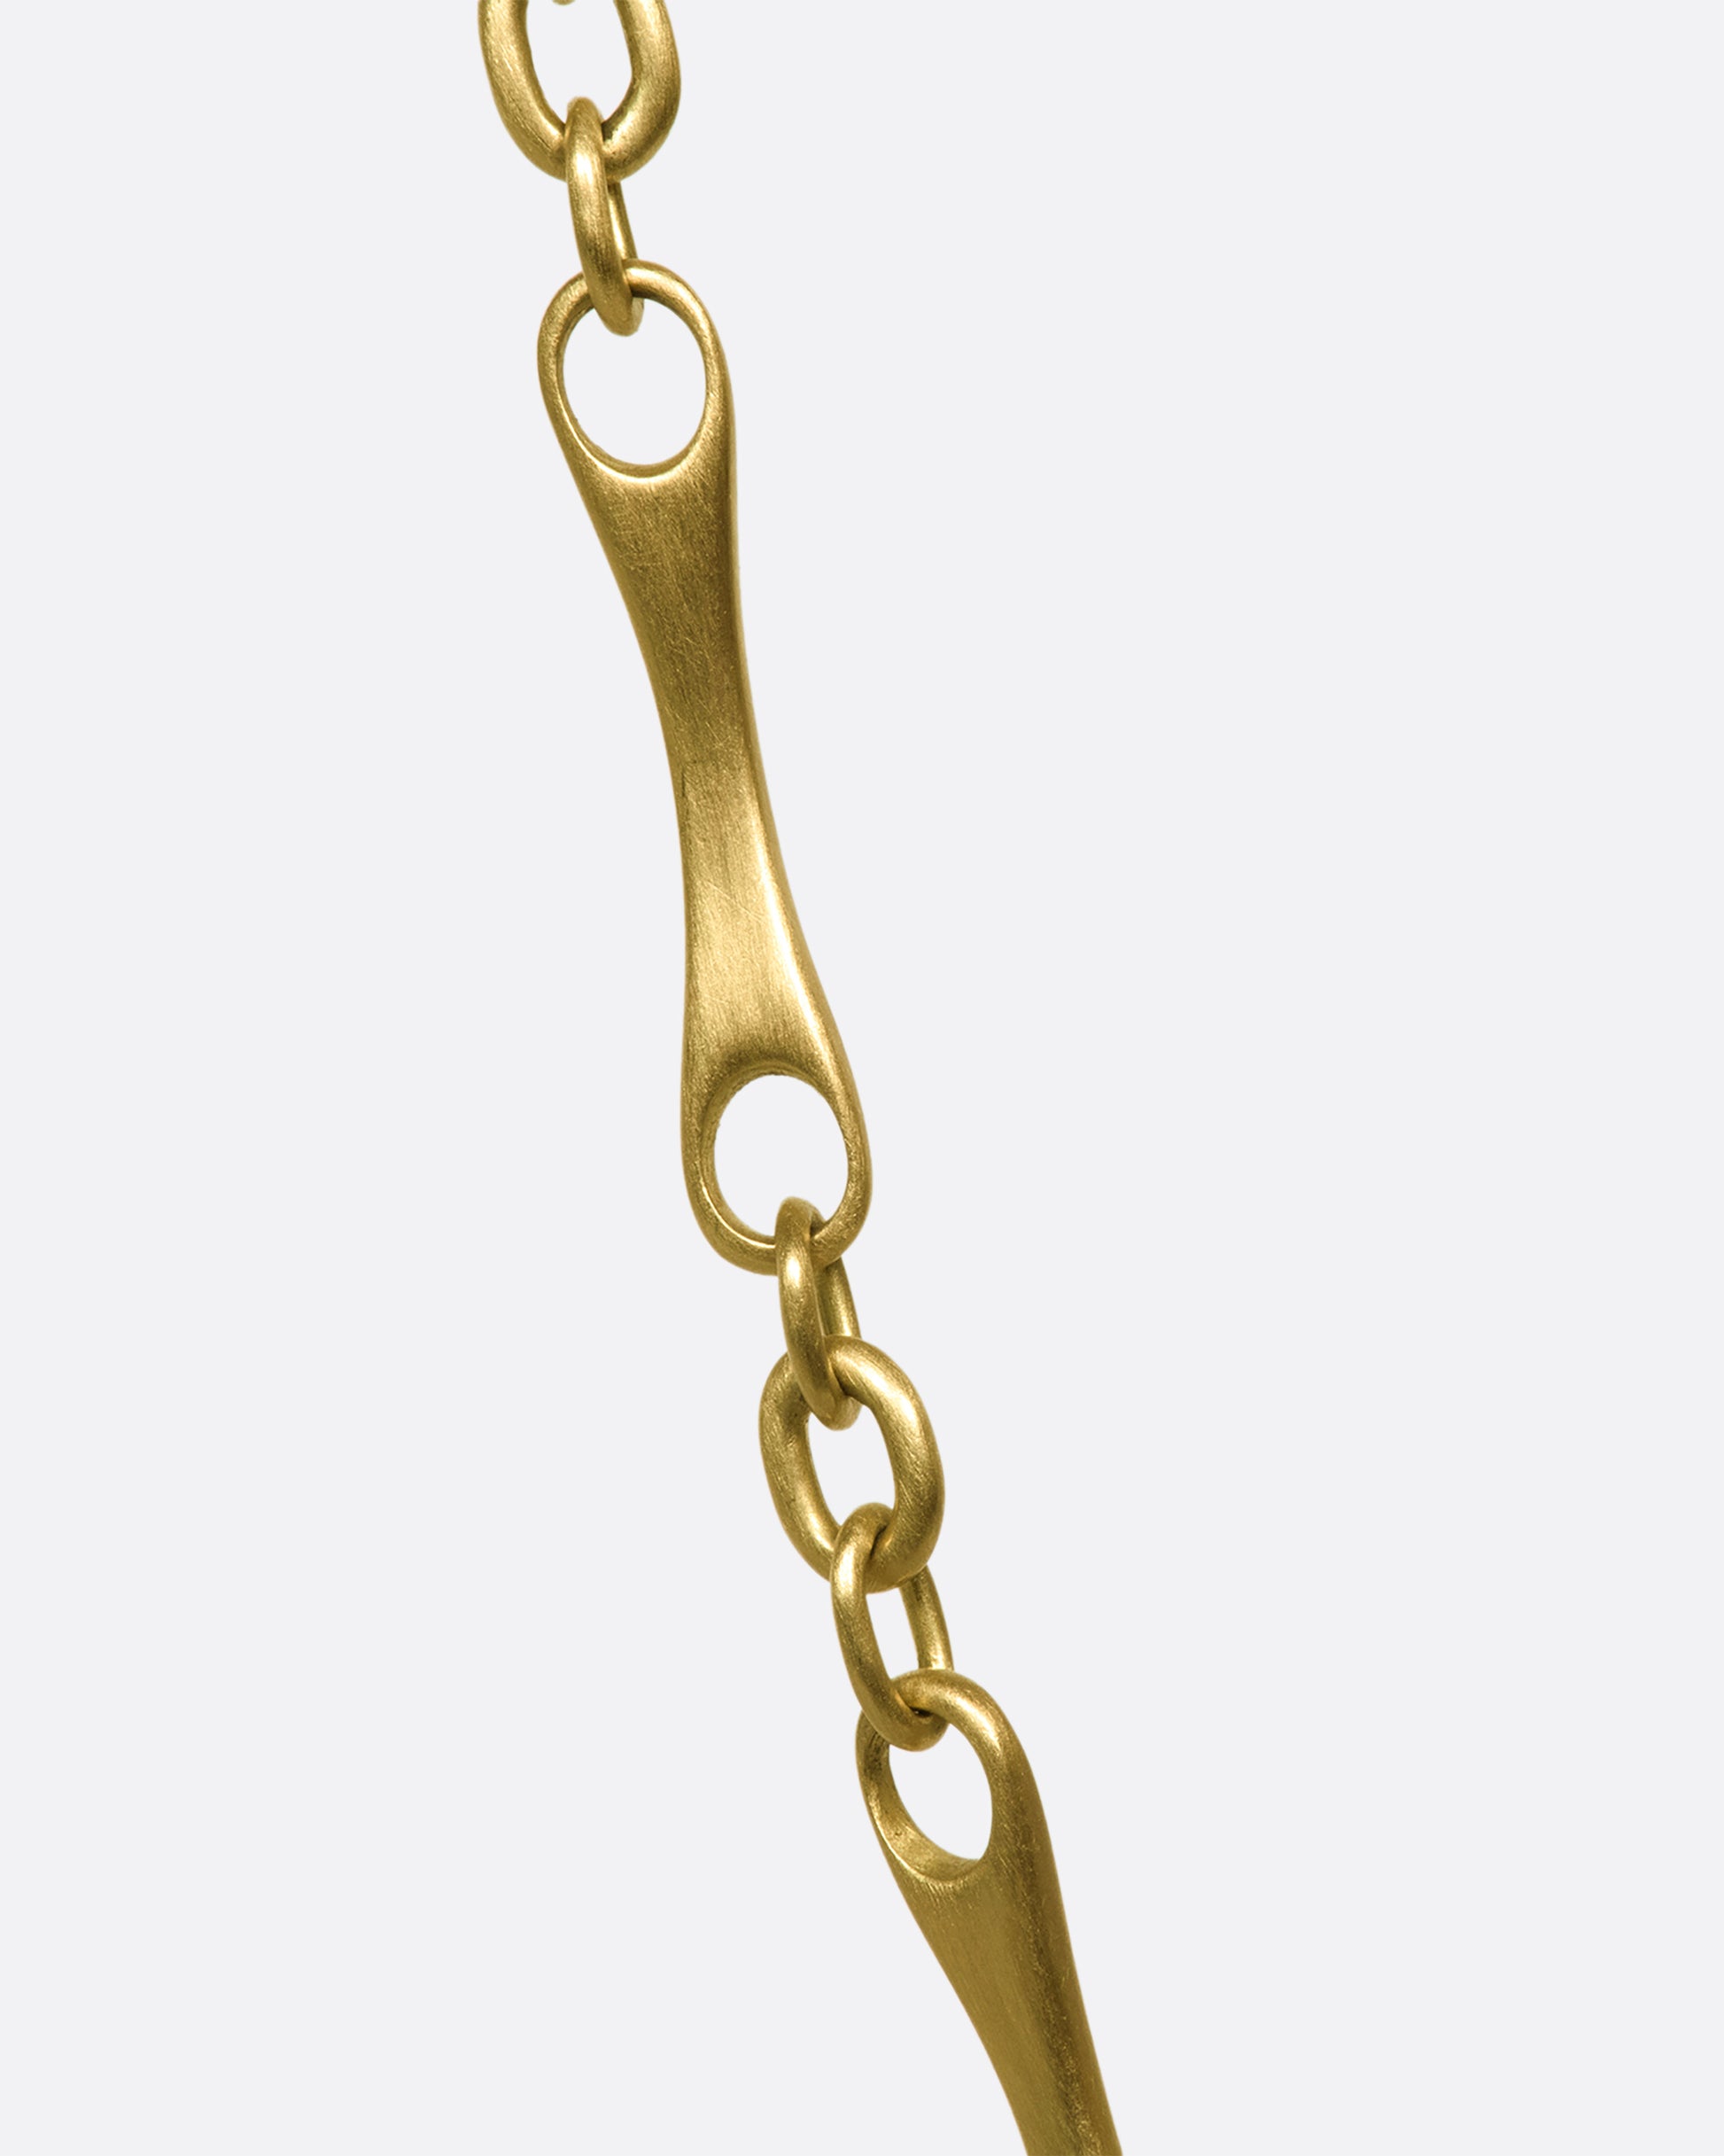 A close up of a gold necklace with elongated links with circular cut outs on each end.